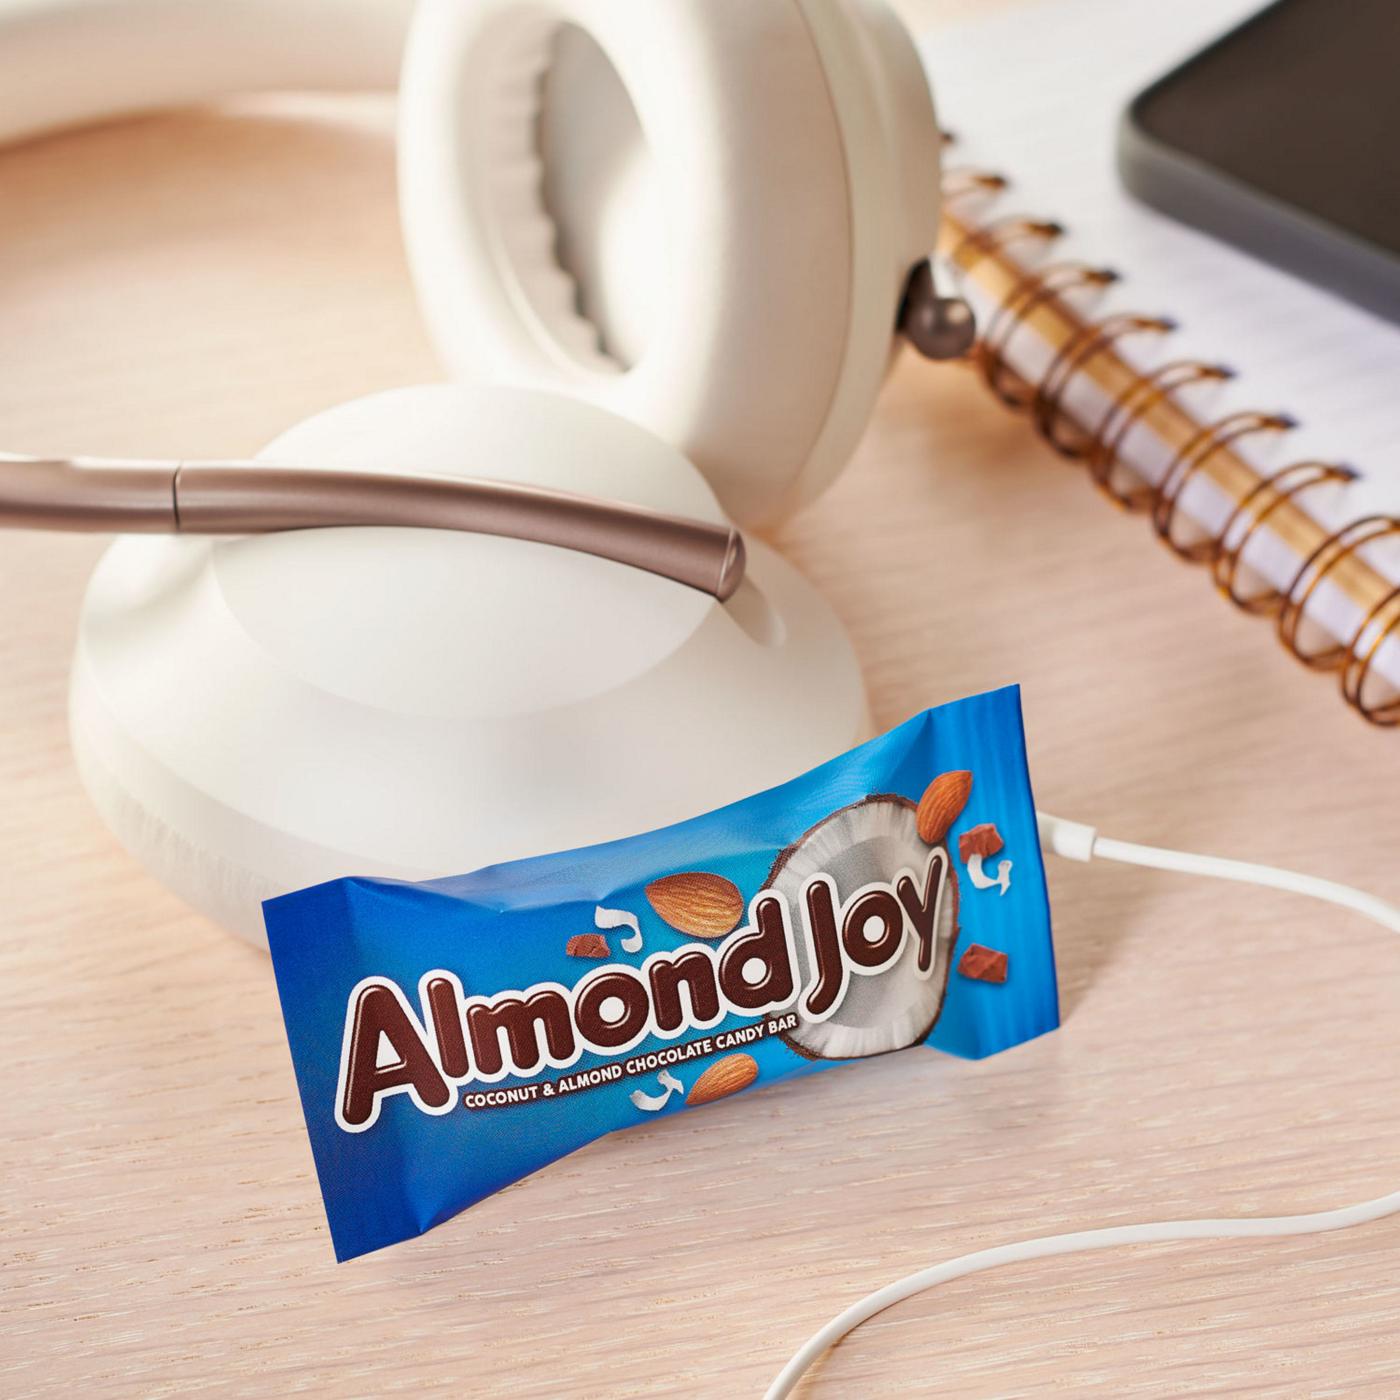 Almond Joy Miniatures Coconut & Almond Chocolate Candy - Share Pack; image 3 of 7